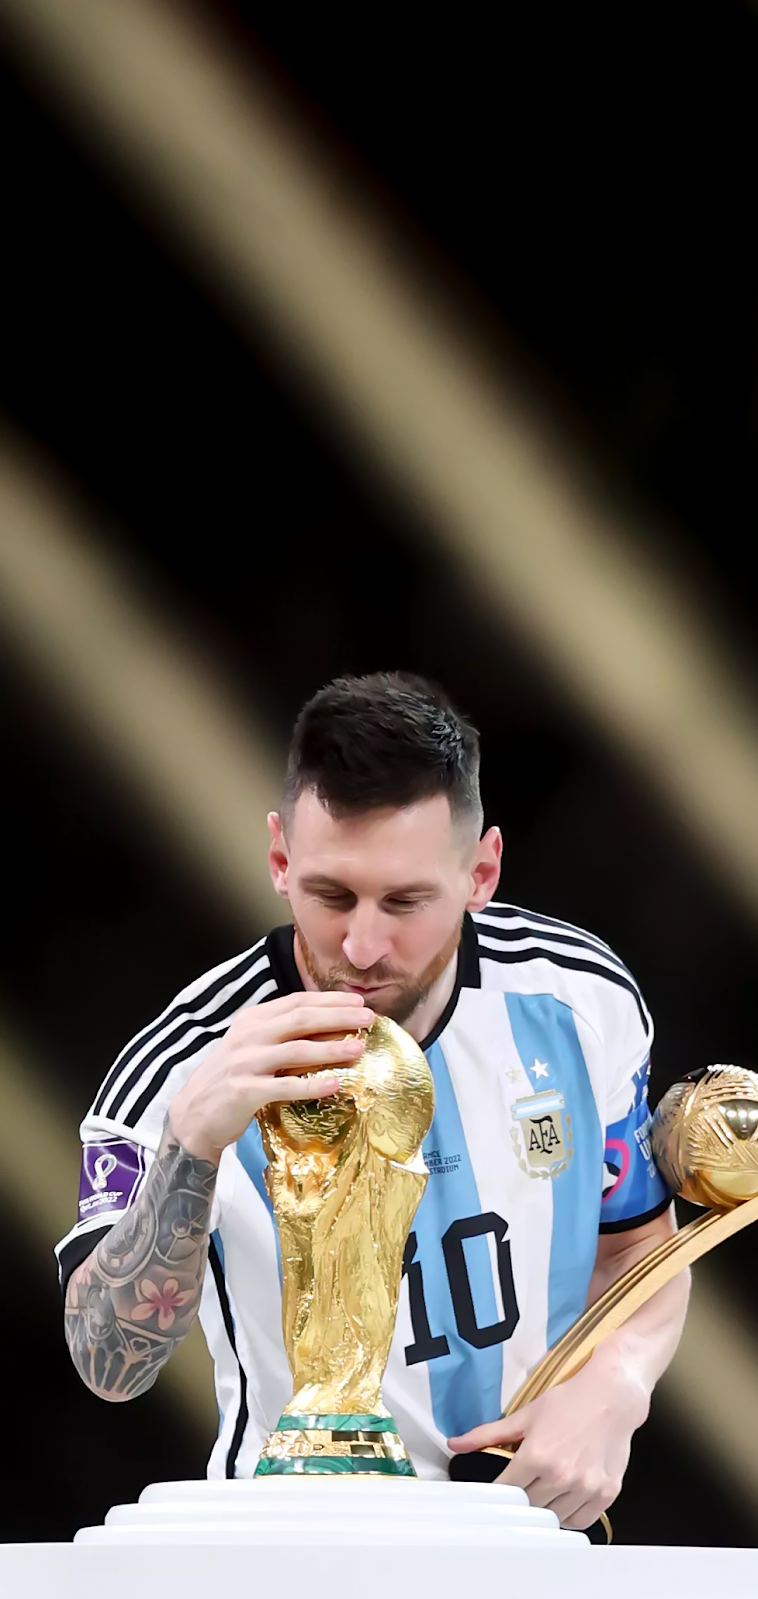 Lionel Messi 2022 World Cup Images  HD Wallpapers For Free Download LM10  HD Photos in Argentina Jersey with WC Trophy Pictures to Share Online    LatestLY